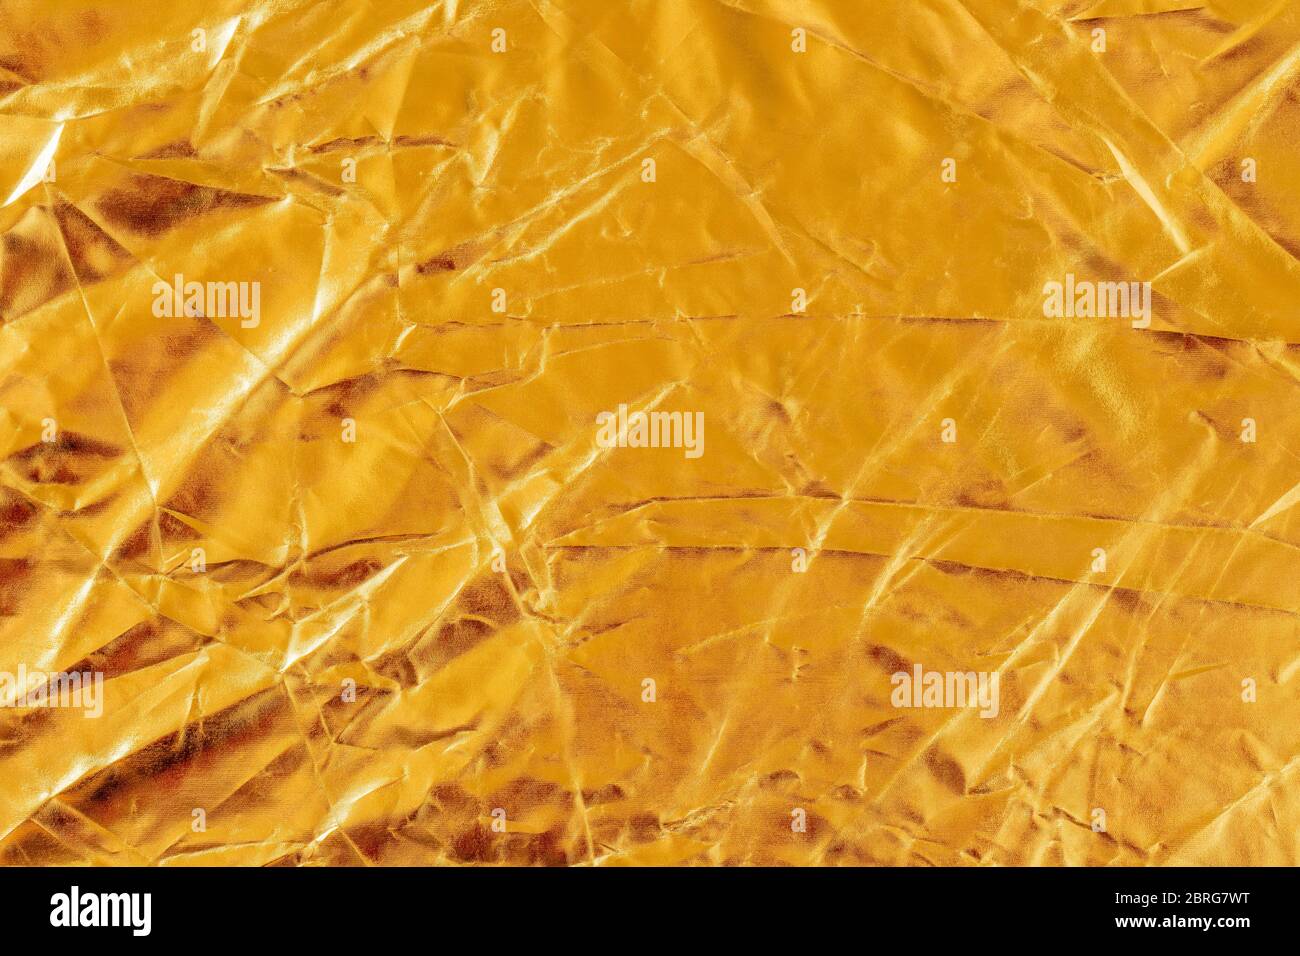 Shiny yellow leaf gold foil texture. Can be used as background. Stock Photo